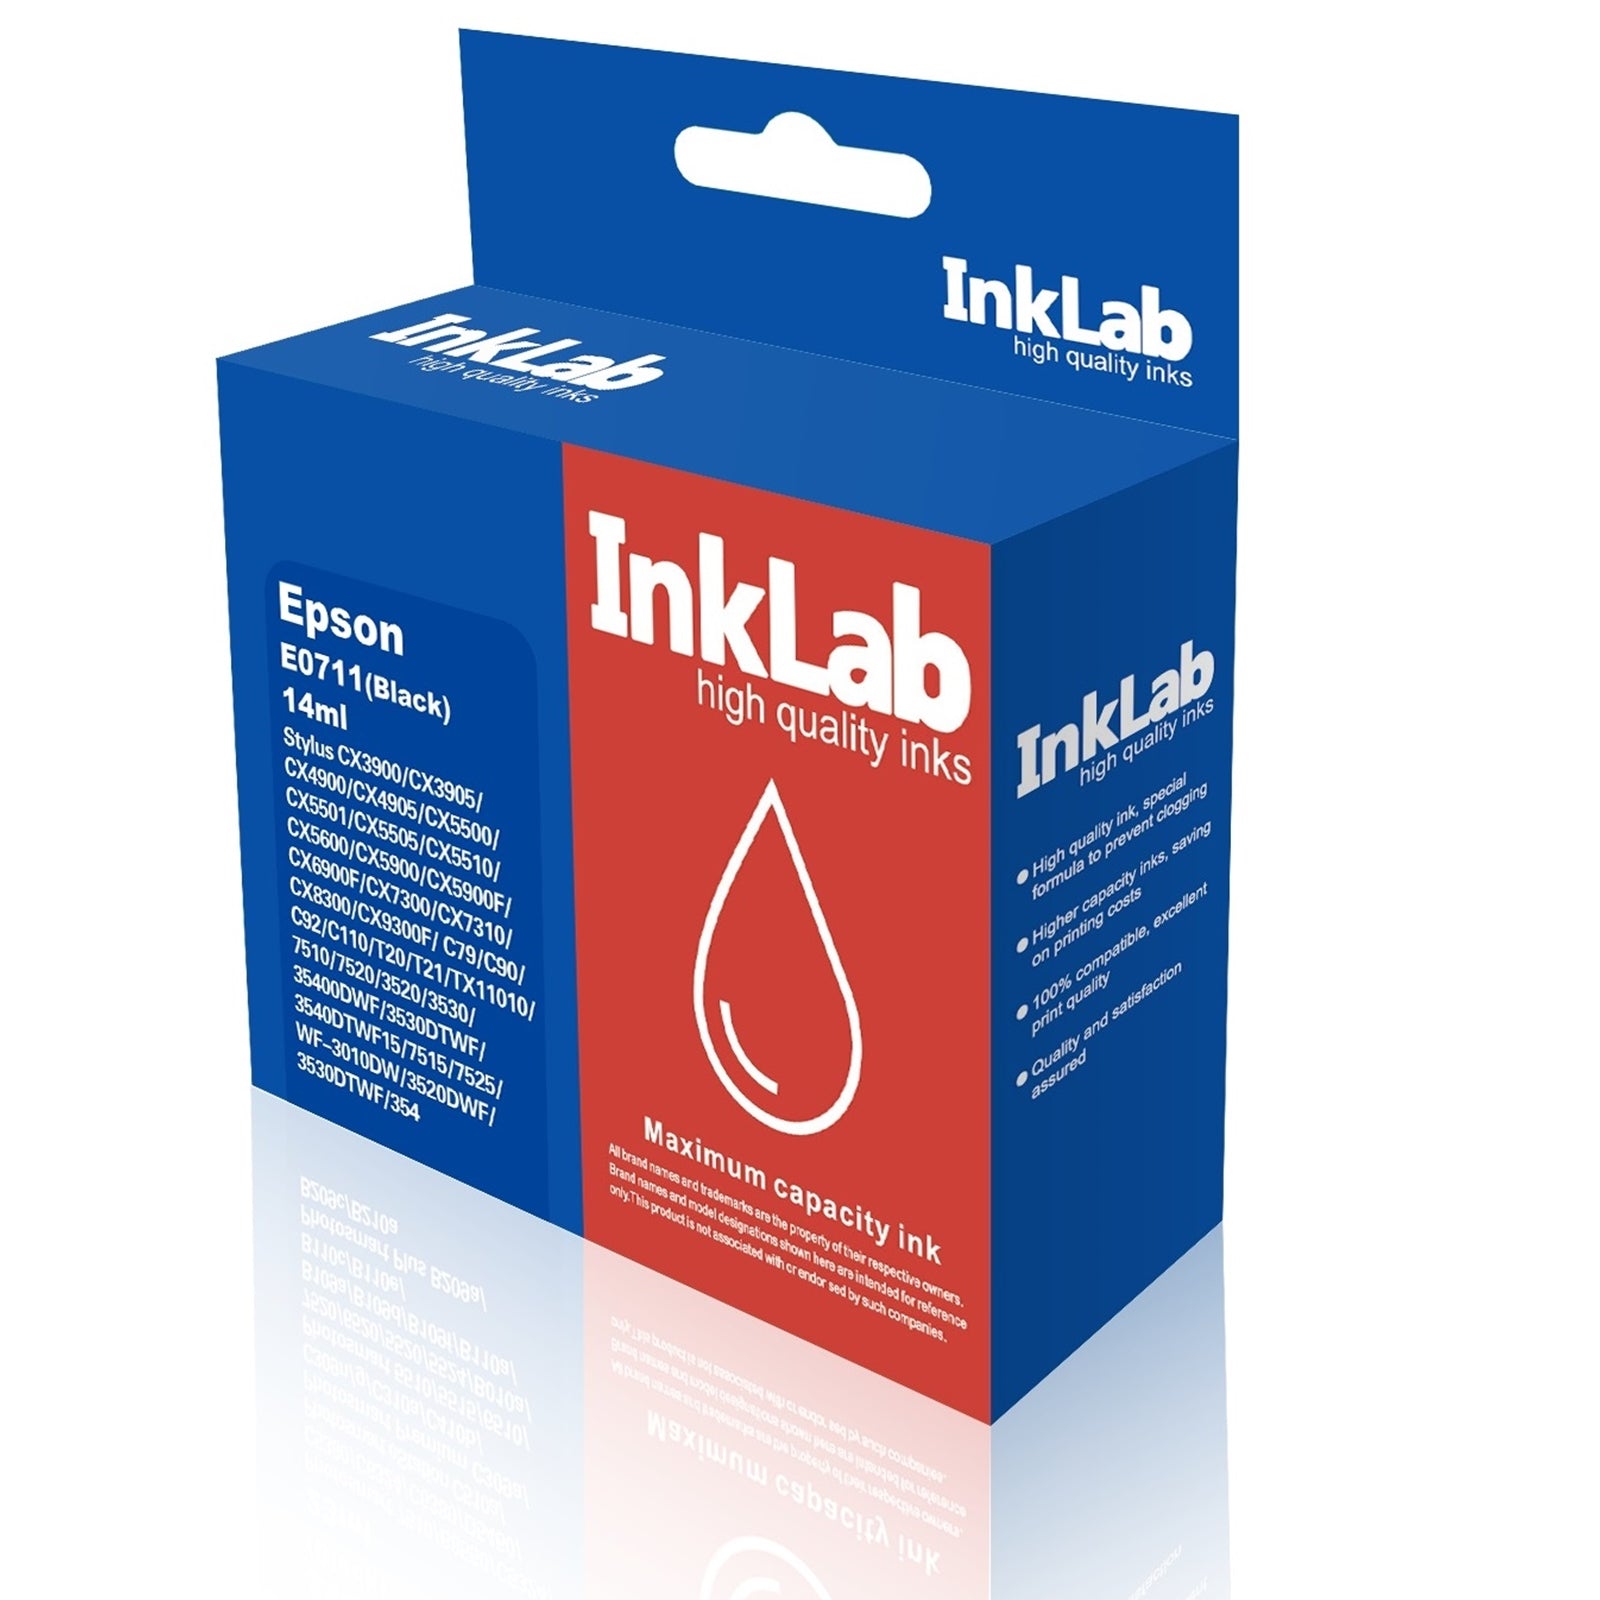 InkLab 711 Epson Compatible Replacement Ink - Black